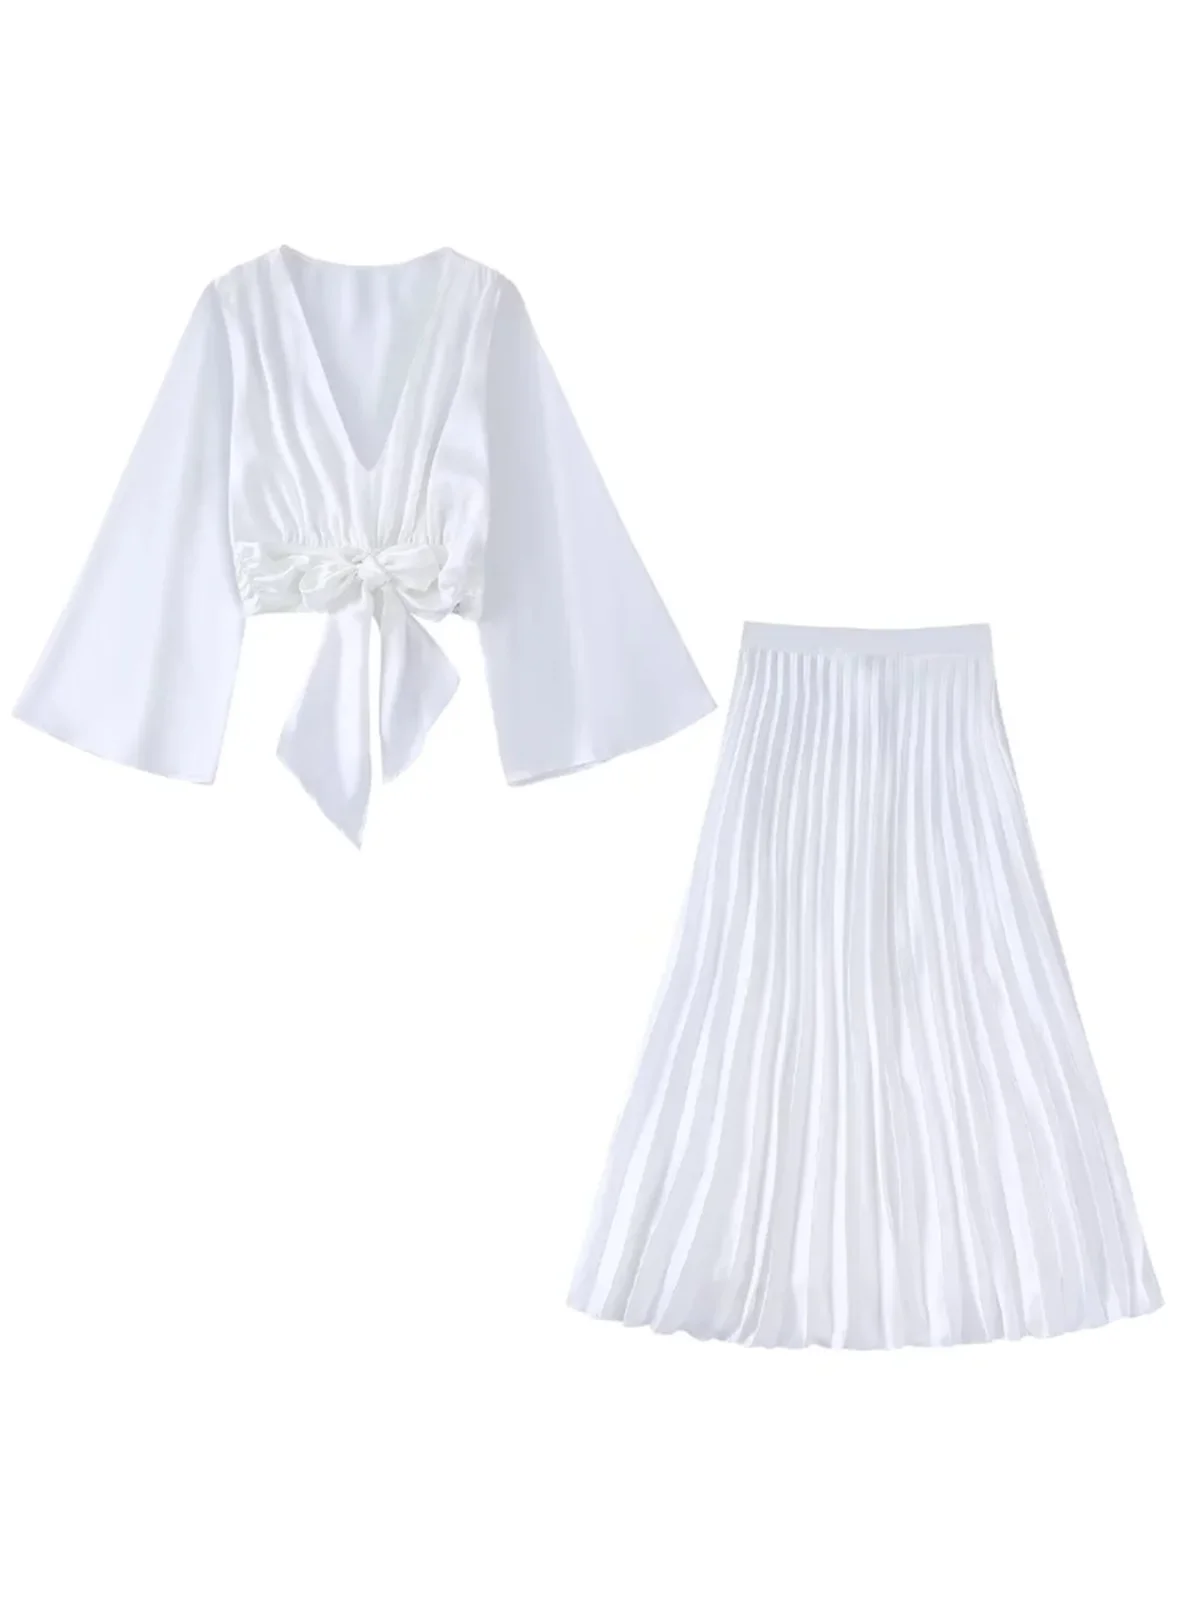 

2022 Summer Women Fashion With White Bow Tied Flare Sleeves Cropped Tops Folds Empire Waist Skirts New Casual Two Piece Sets